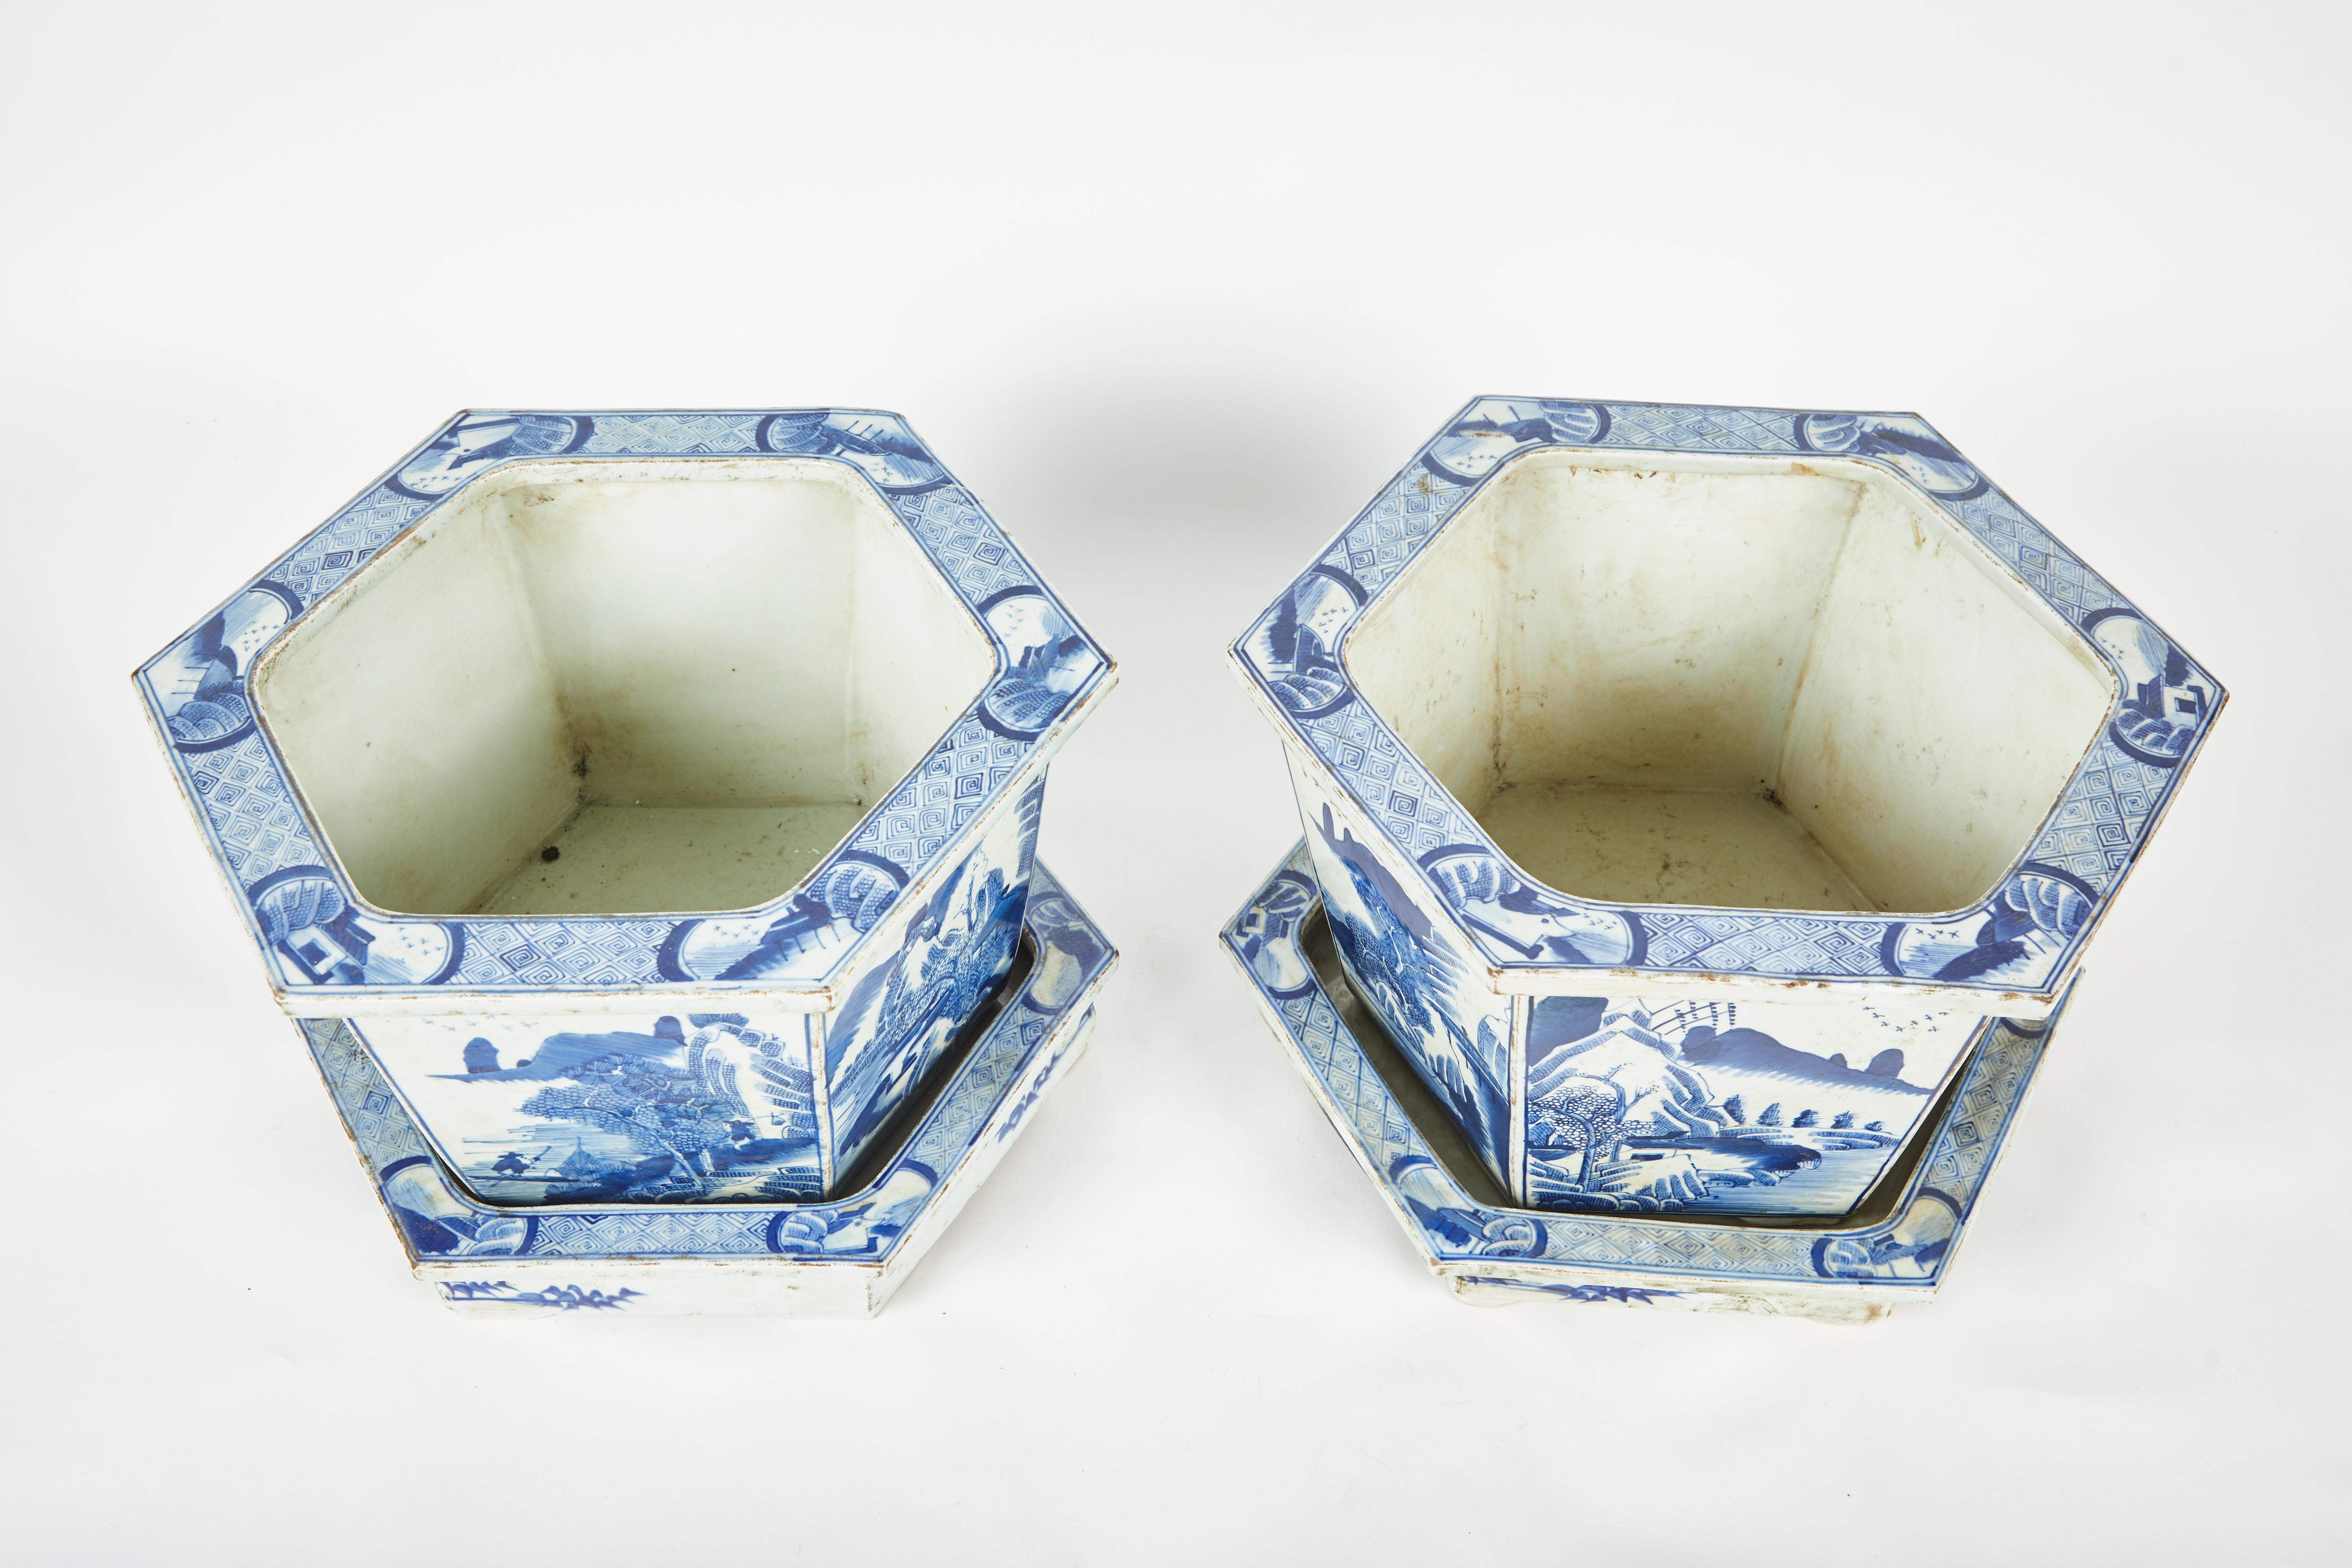 Ceramic Pair of Chinese Blue and White Cachepots with Underplates